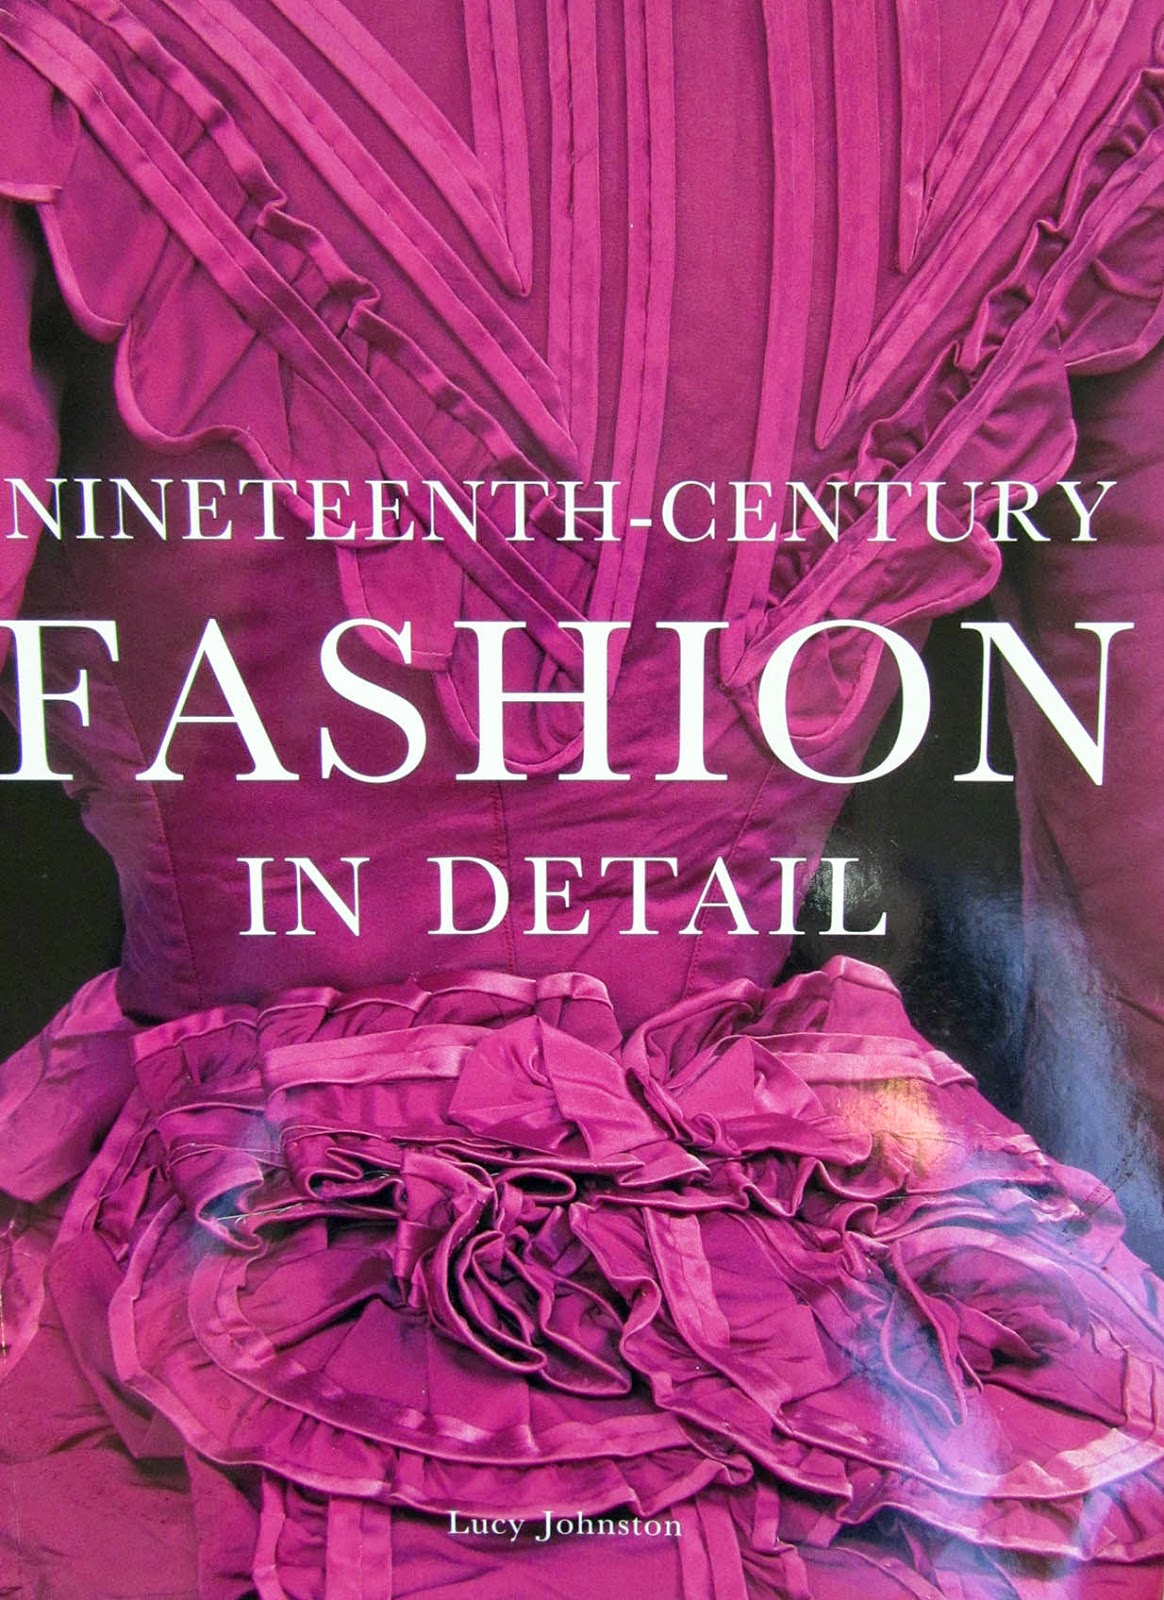 book: Fashion in detail